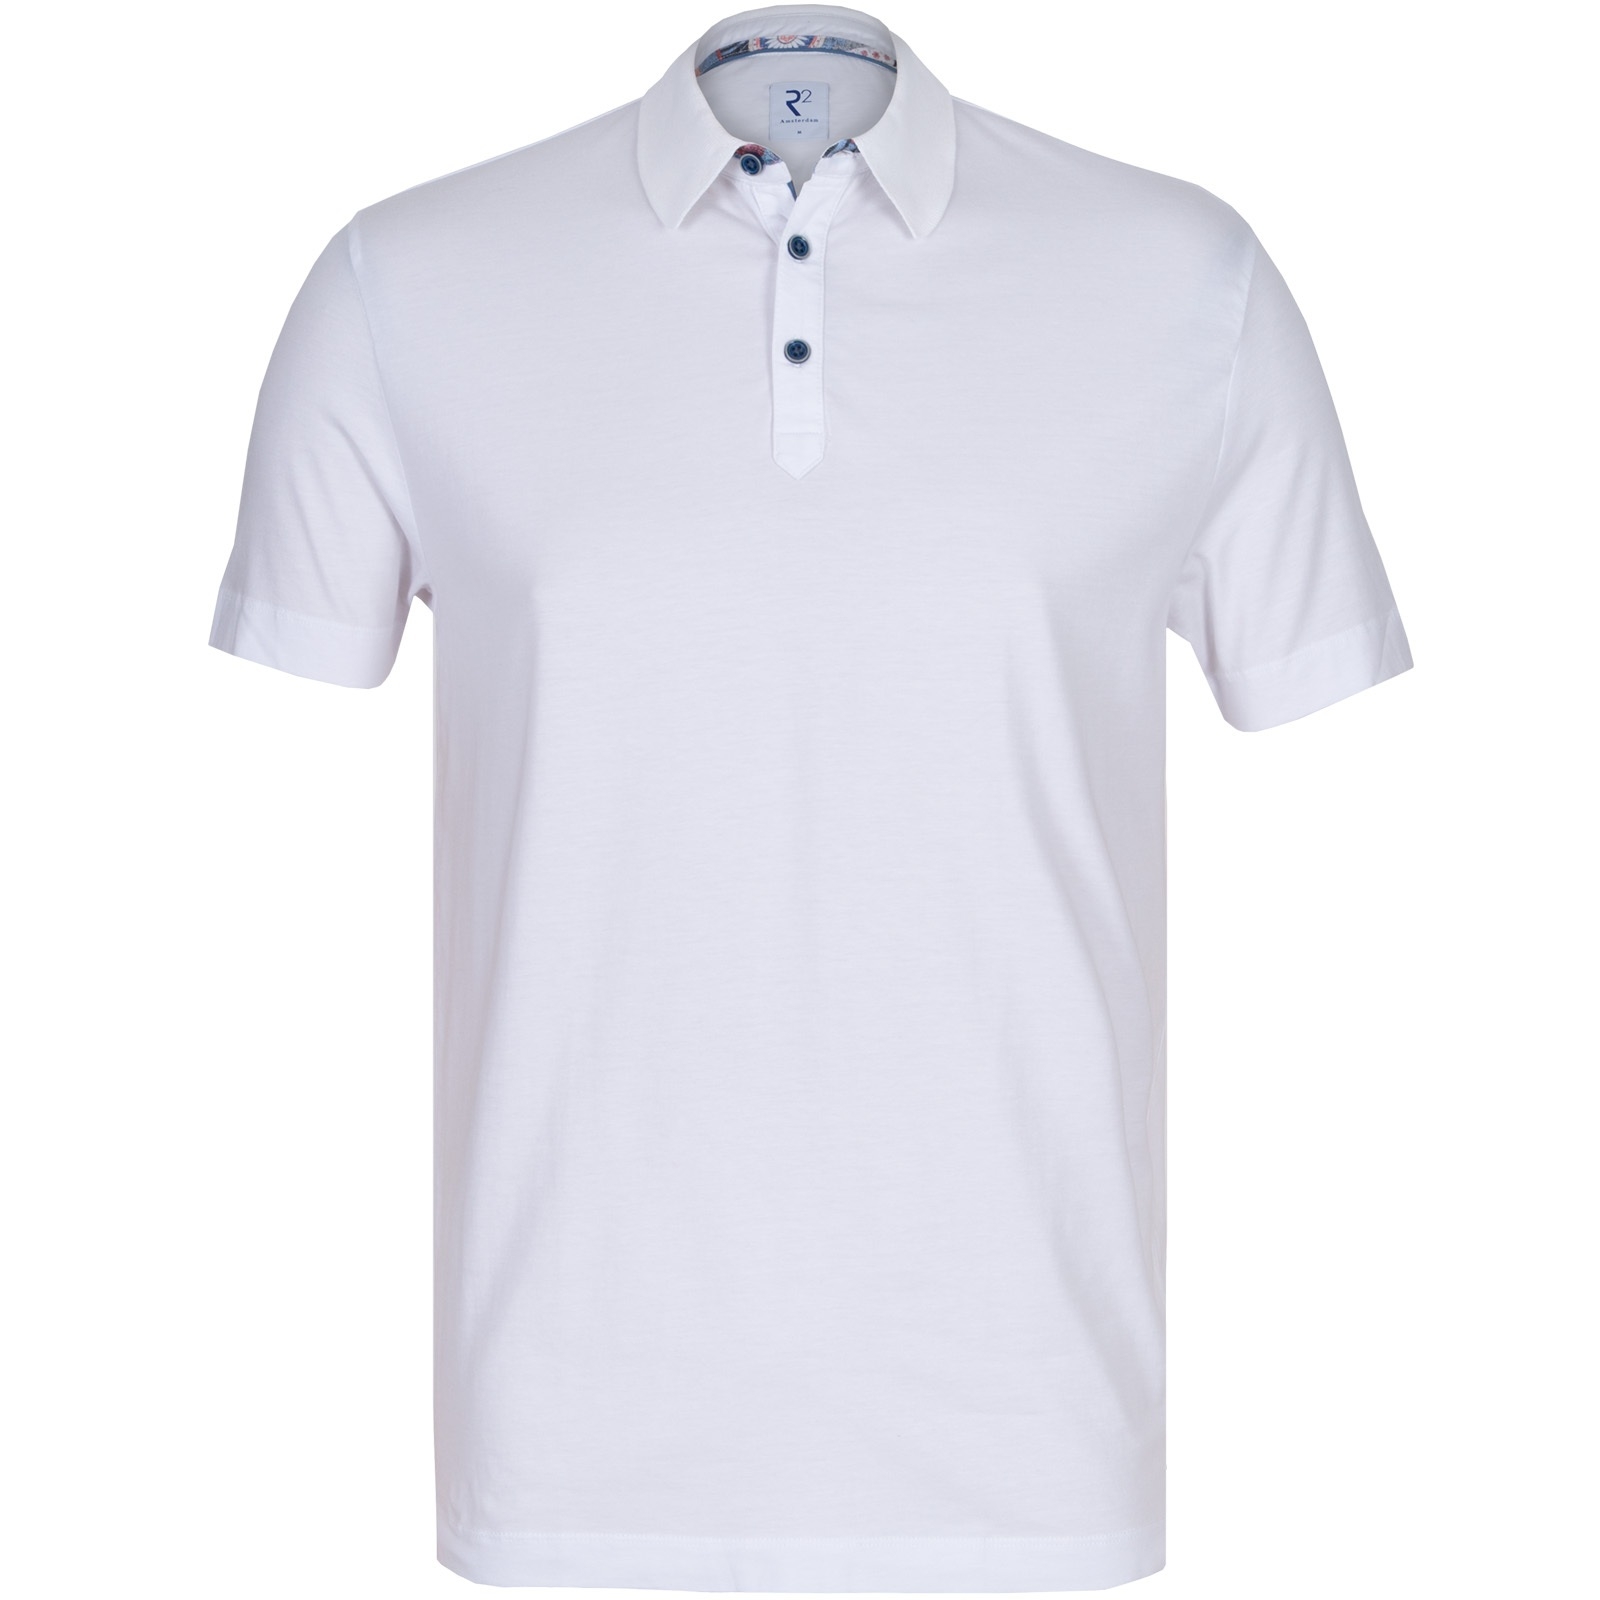 Luxury Jersey Knit Polo - T-Shirts & Polos-Polos : Fifth Avenue ...